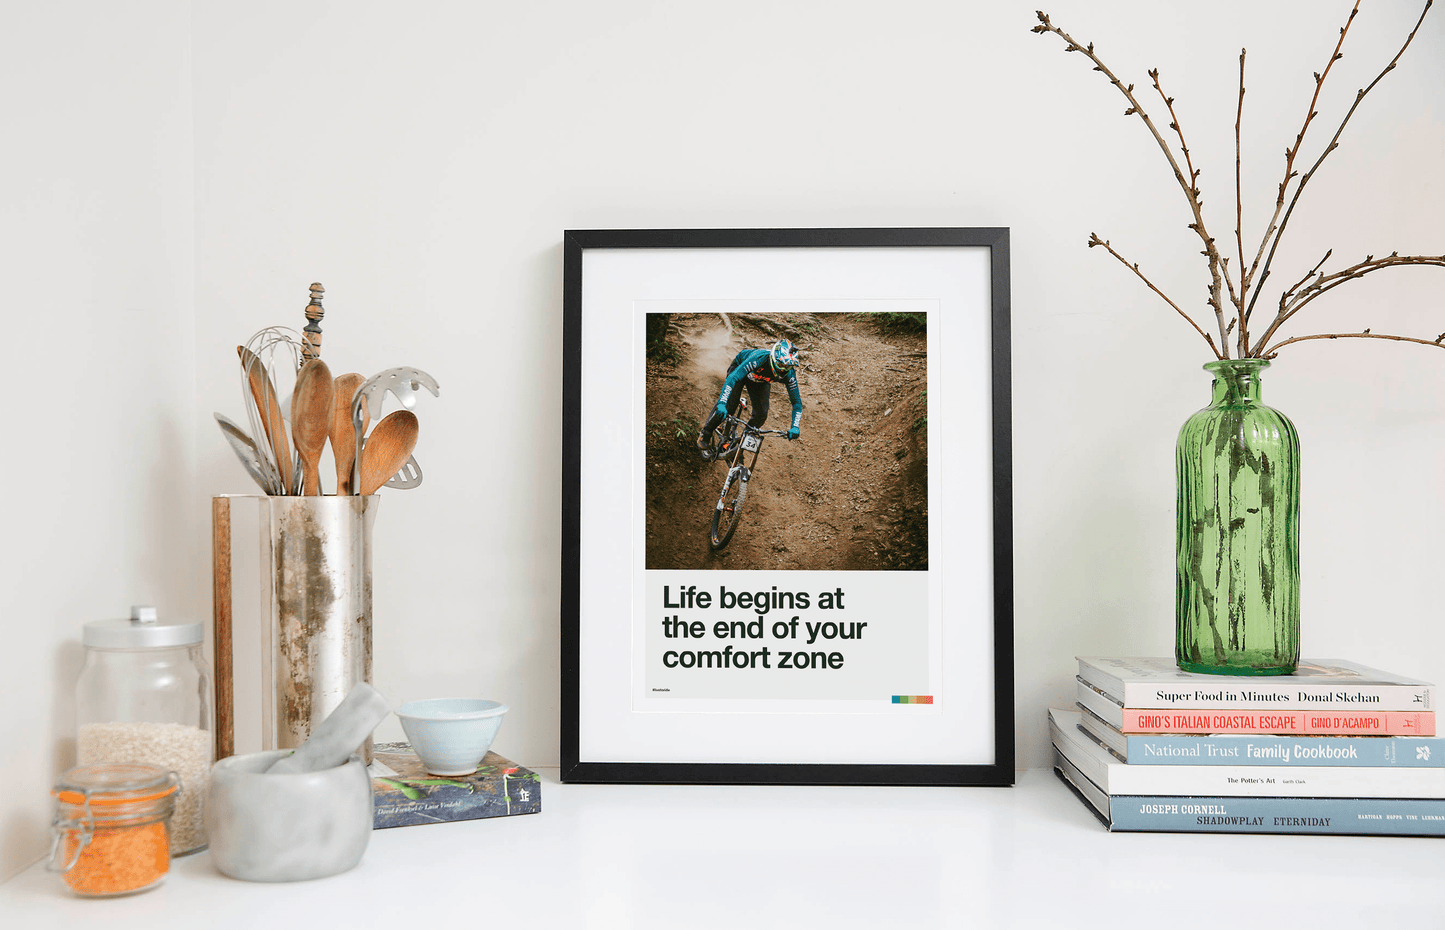 Life Begins at the End of Your Comfort Zone - Steve Peat Art Print